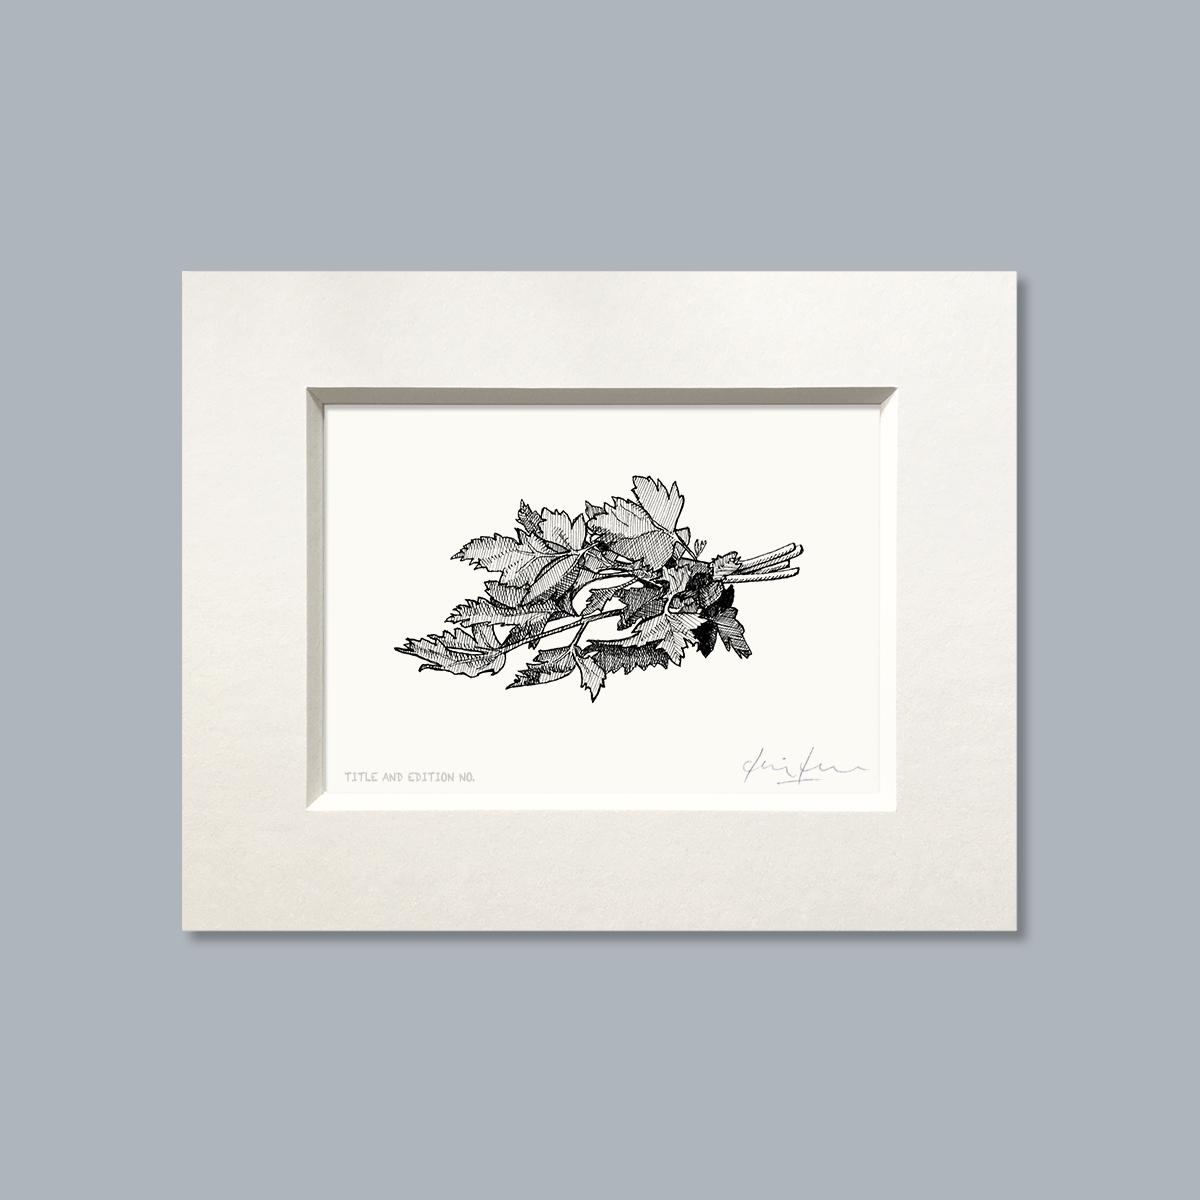 Limited edition print from pen and ink drawing of a bunch of parsley in a white mount